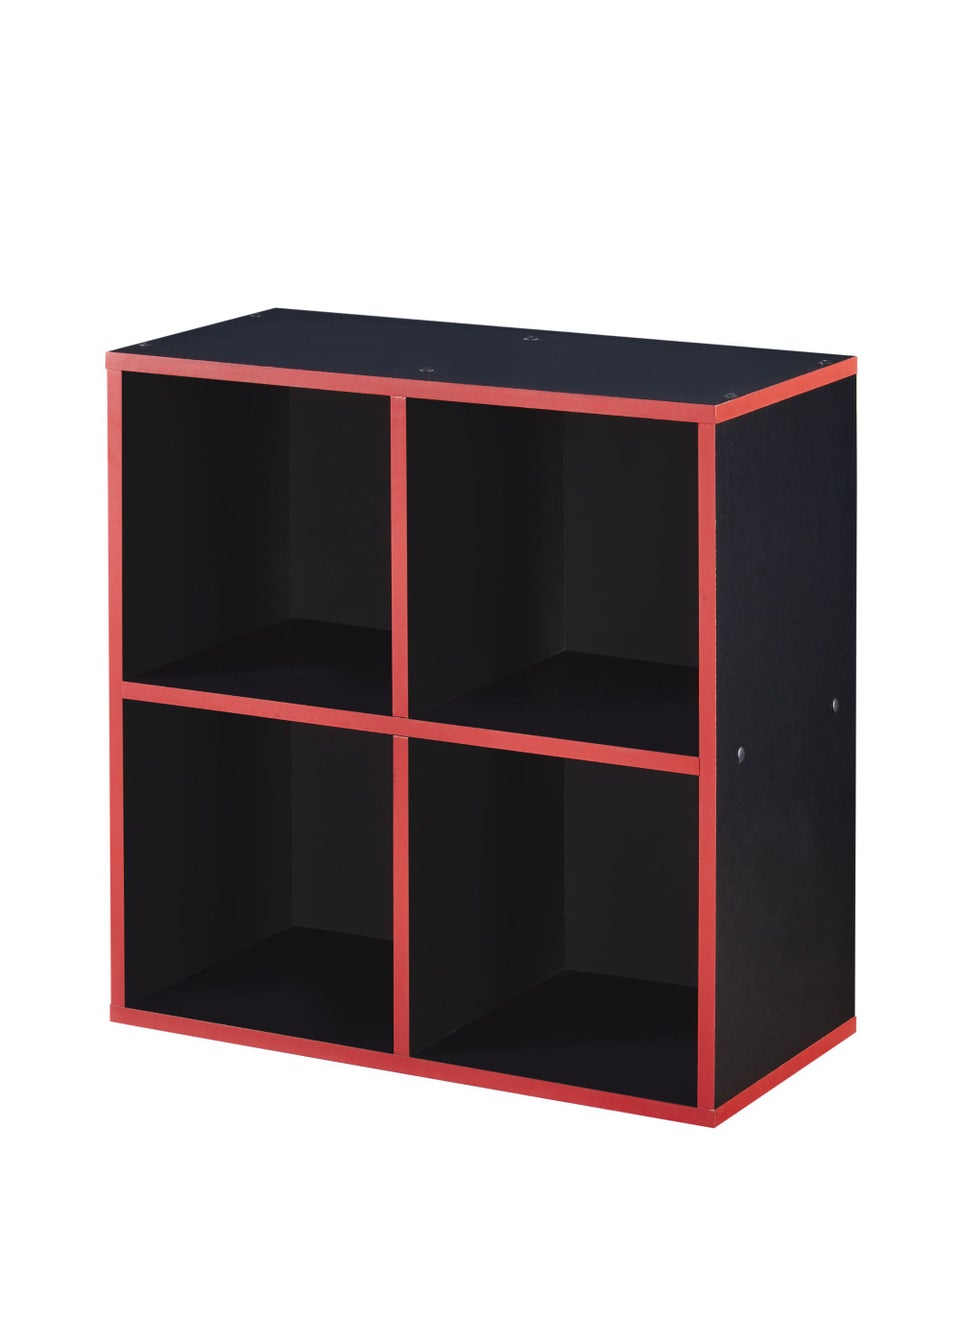 Lloyd Pascal 4 Cube Storage Unit in Black and Red